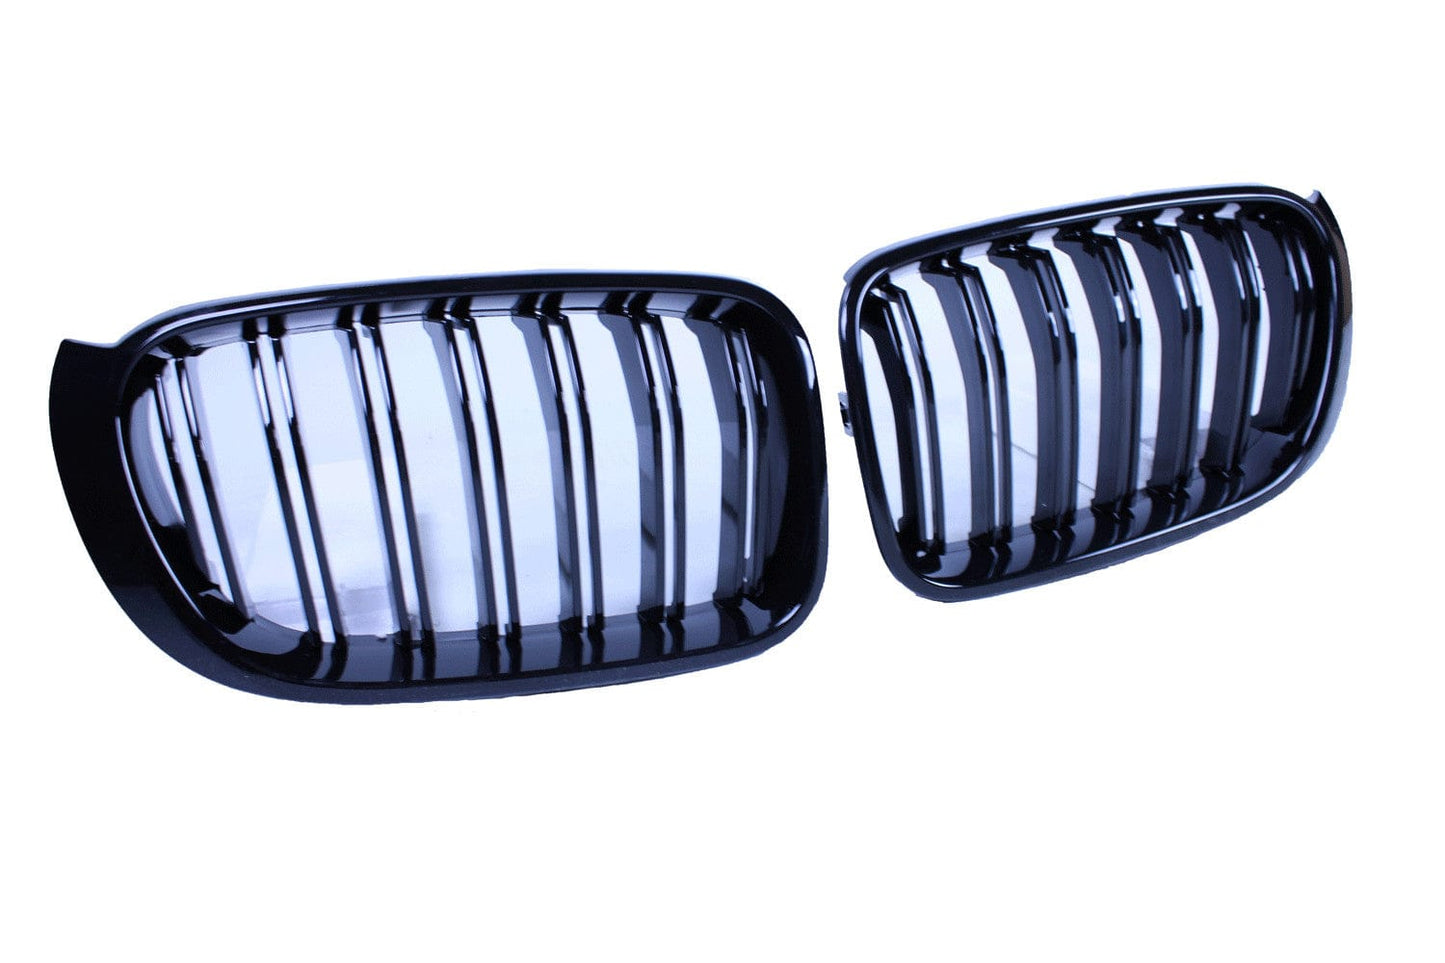 Grill kidneys compatible with BMW X3 and X4 F25 F26 LCI double bars gloss black